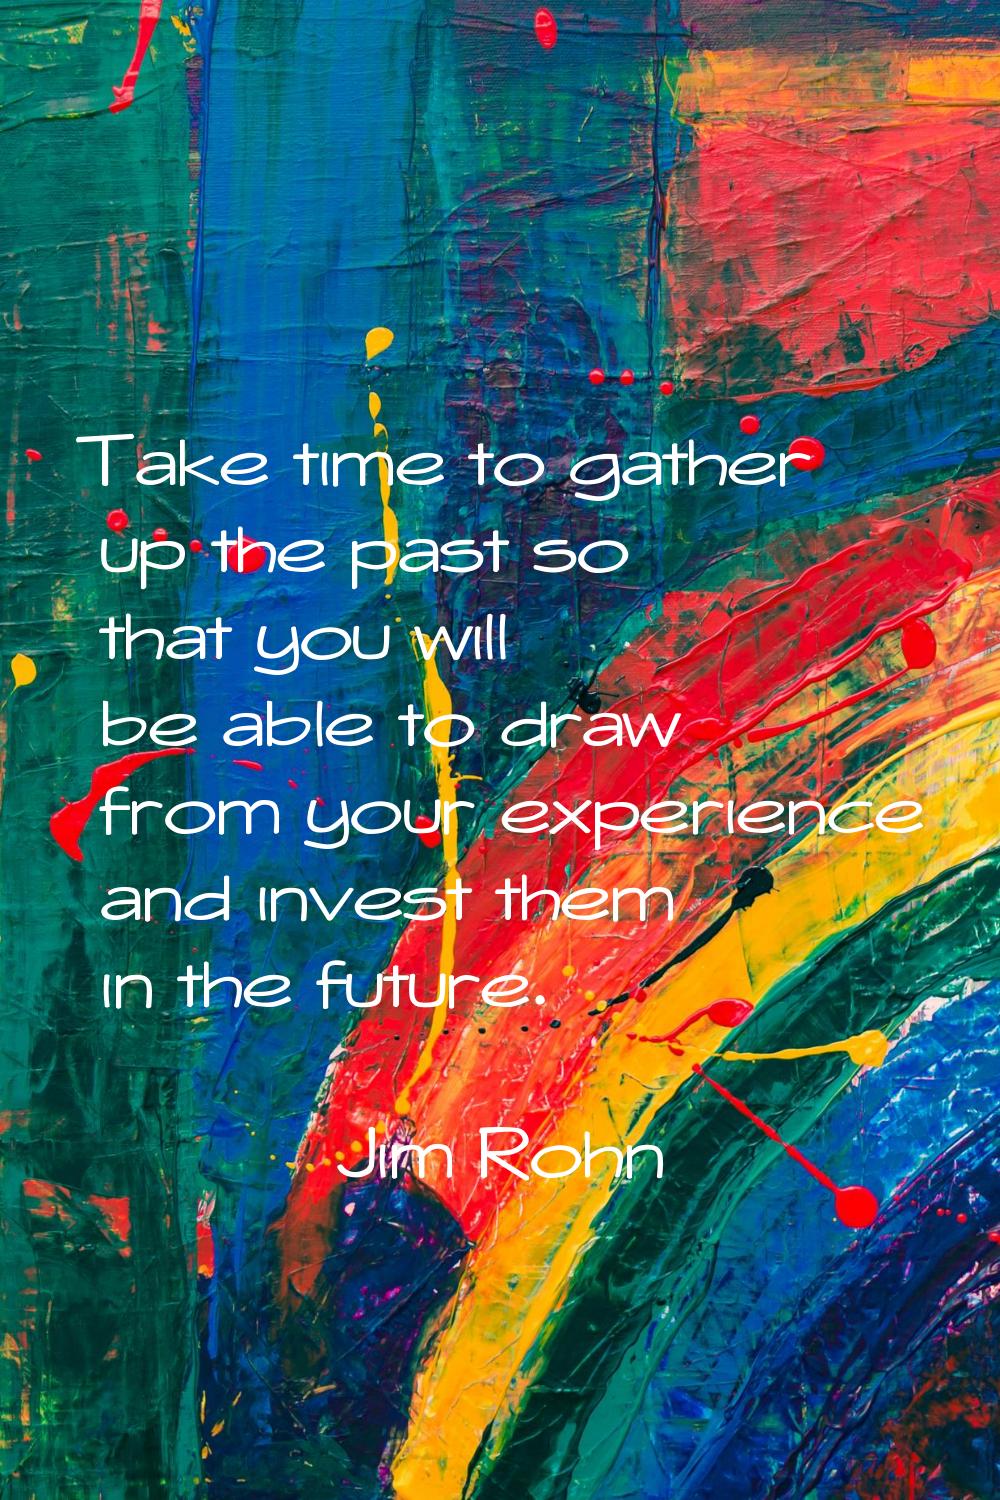 Take time to gather up the past so that you will be able to draw from your experience and invest th